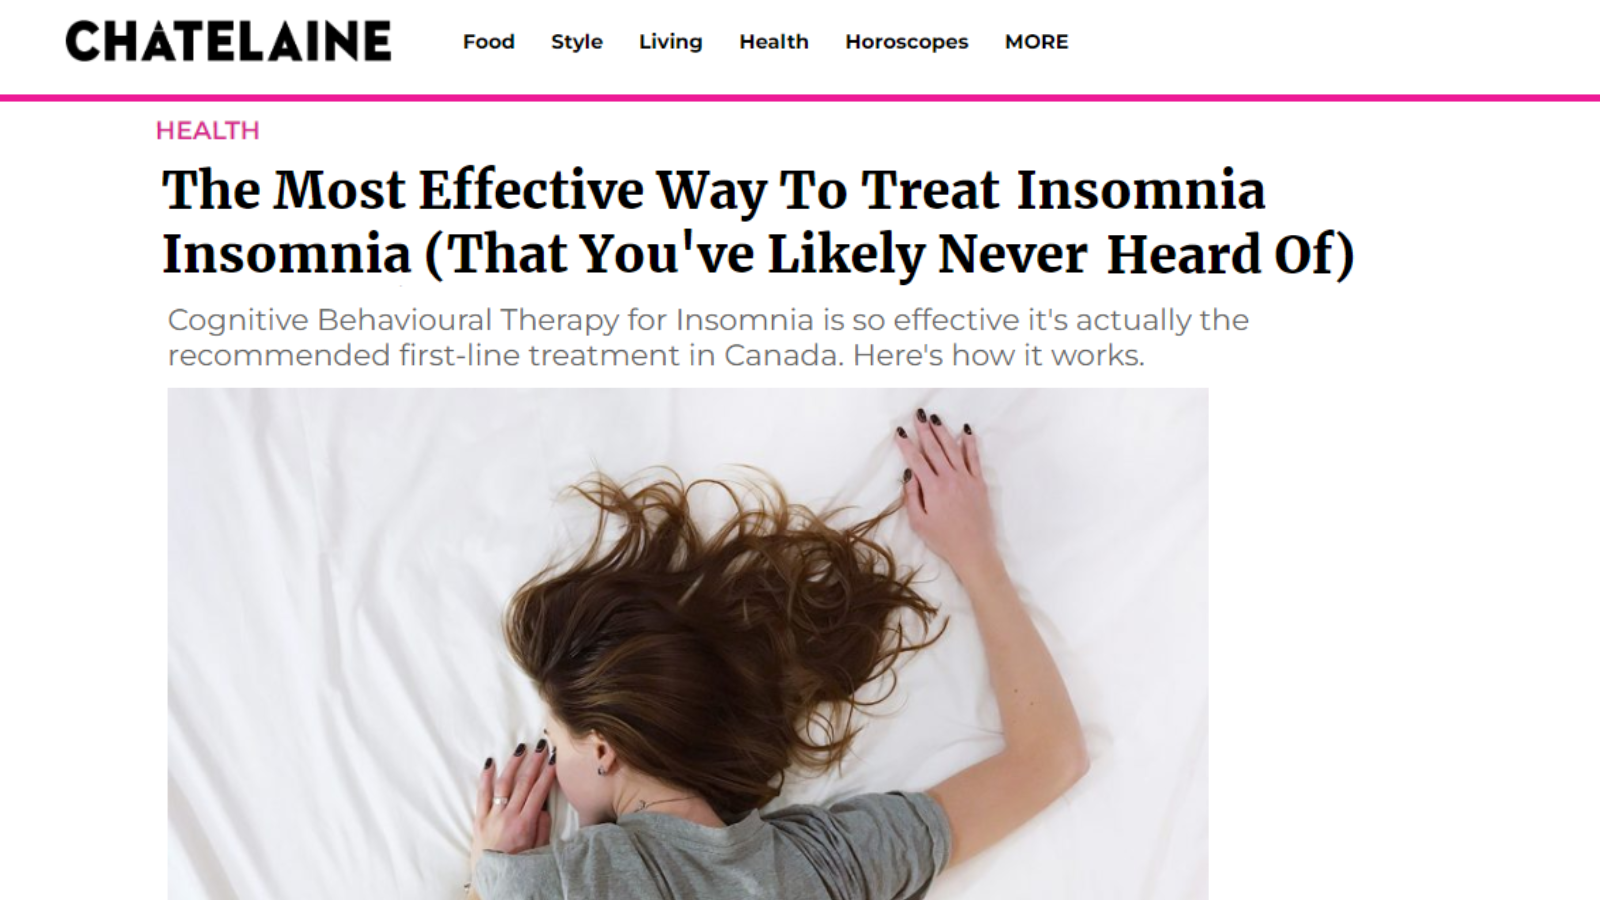 The Most Effective Way To Treat Insomnia (That You've Likely Never Heard Of)